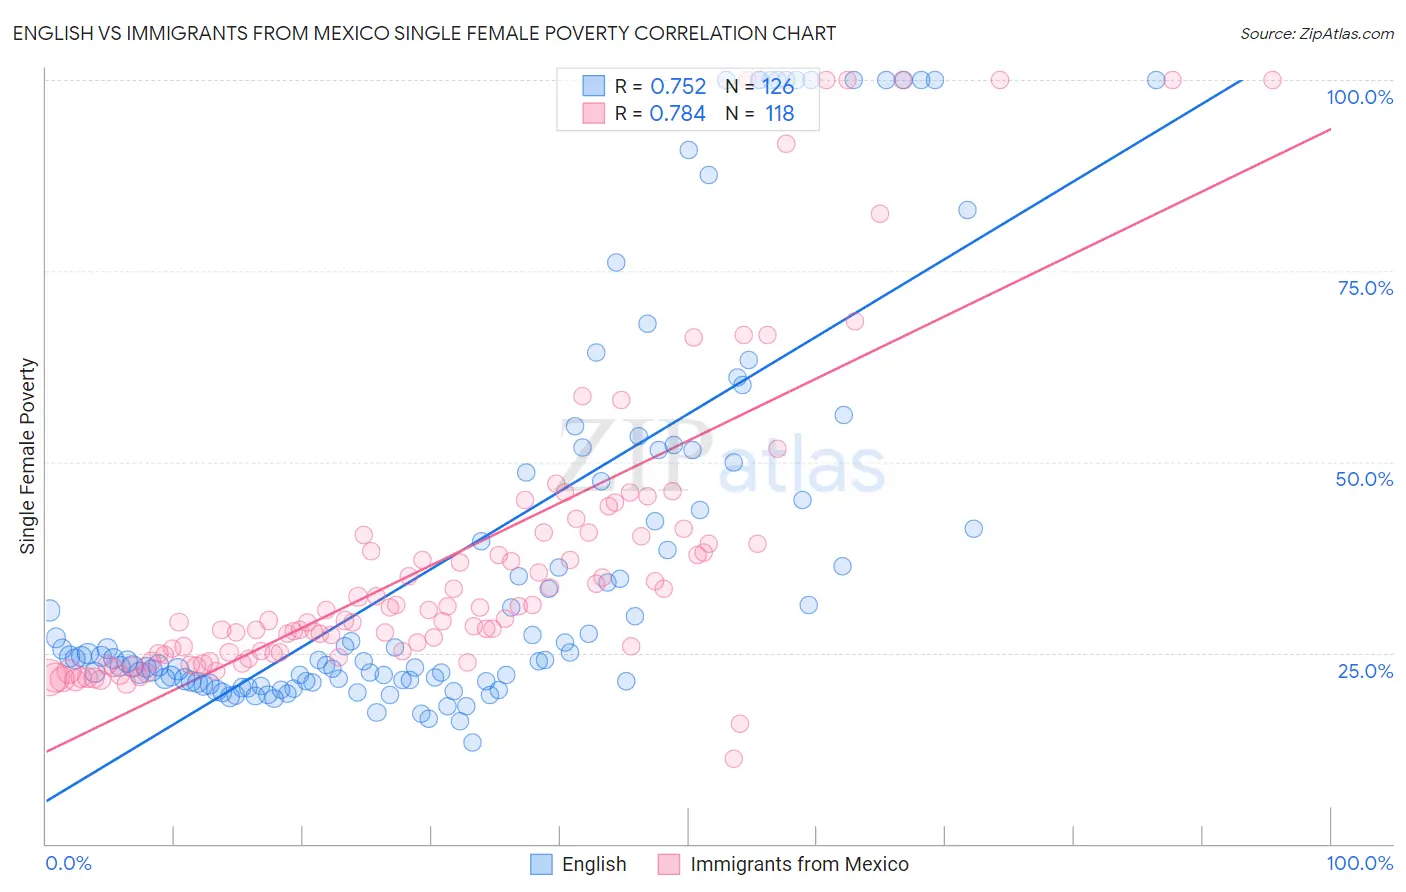 English vs Immigrants from Mexico Single Female Poverty